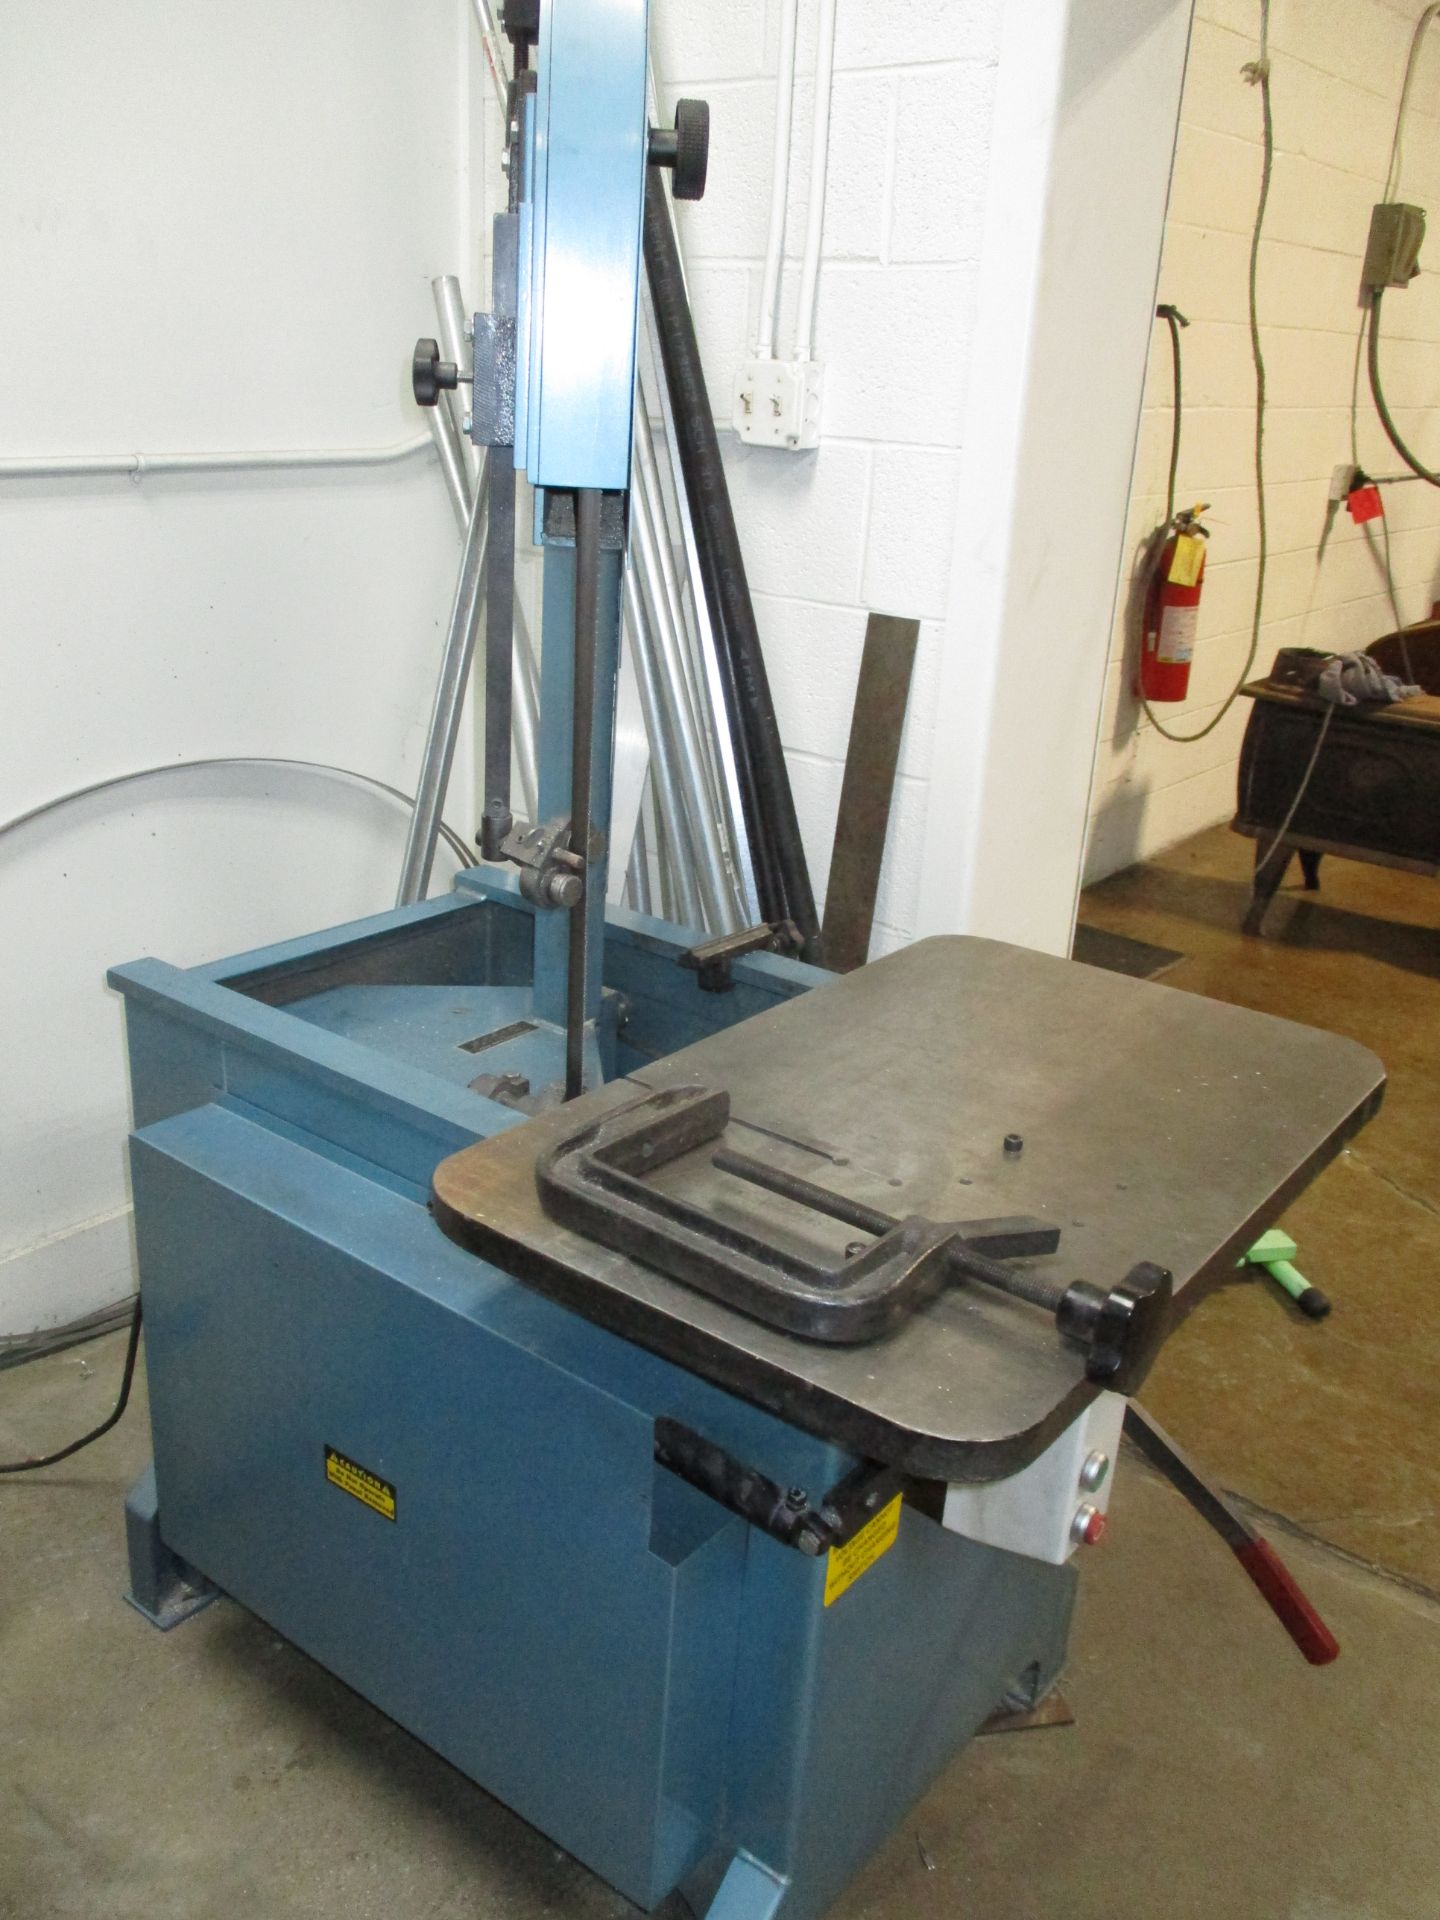 Roll-In Model EF1459 Universal Band Saw, 1" Blade, s/n 14095EF, New 2015, 110/1/60 AC, Loading $50 - Image 2 of 3